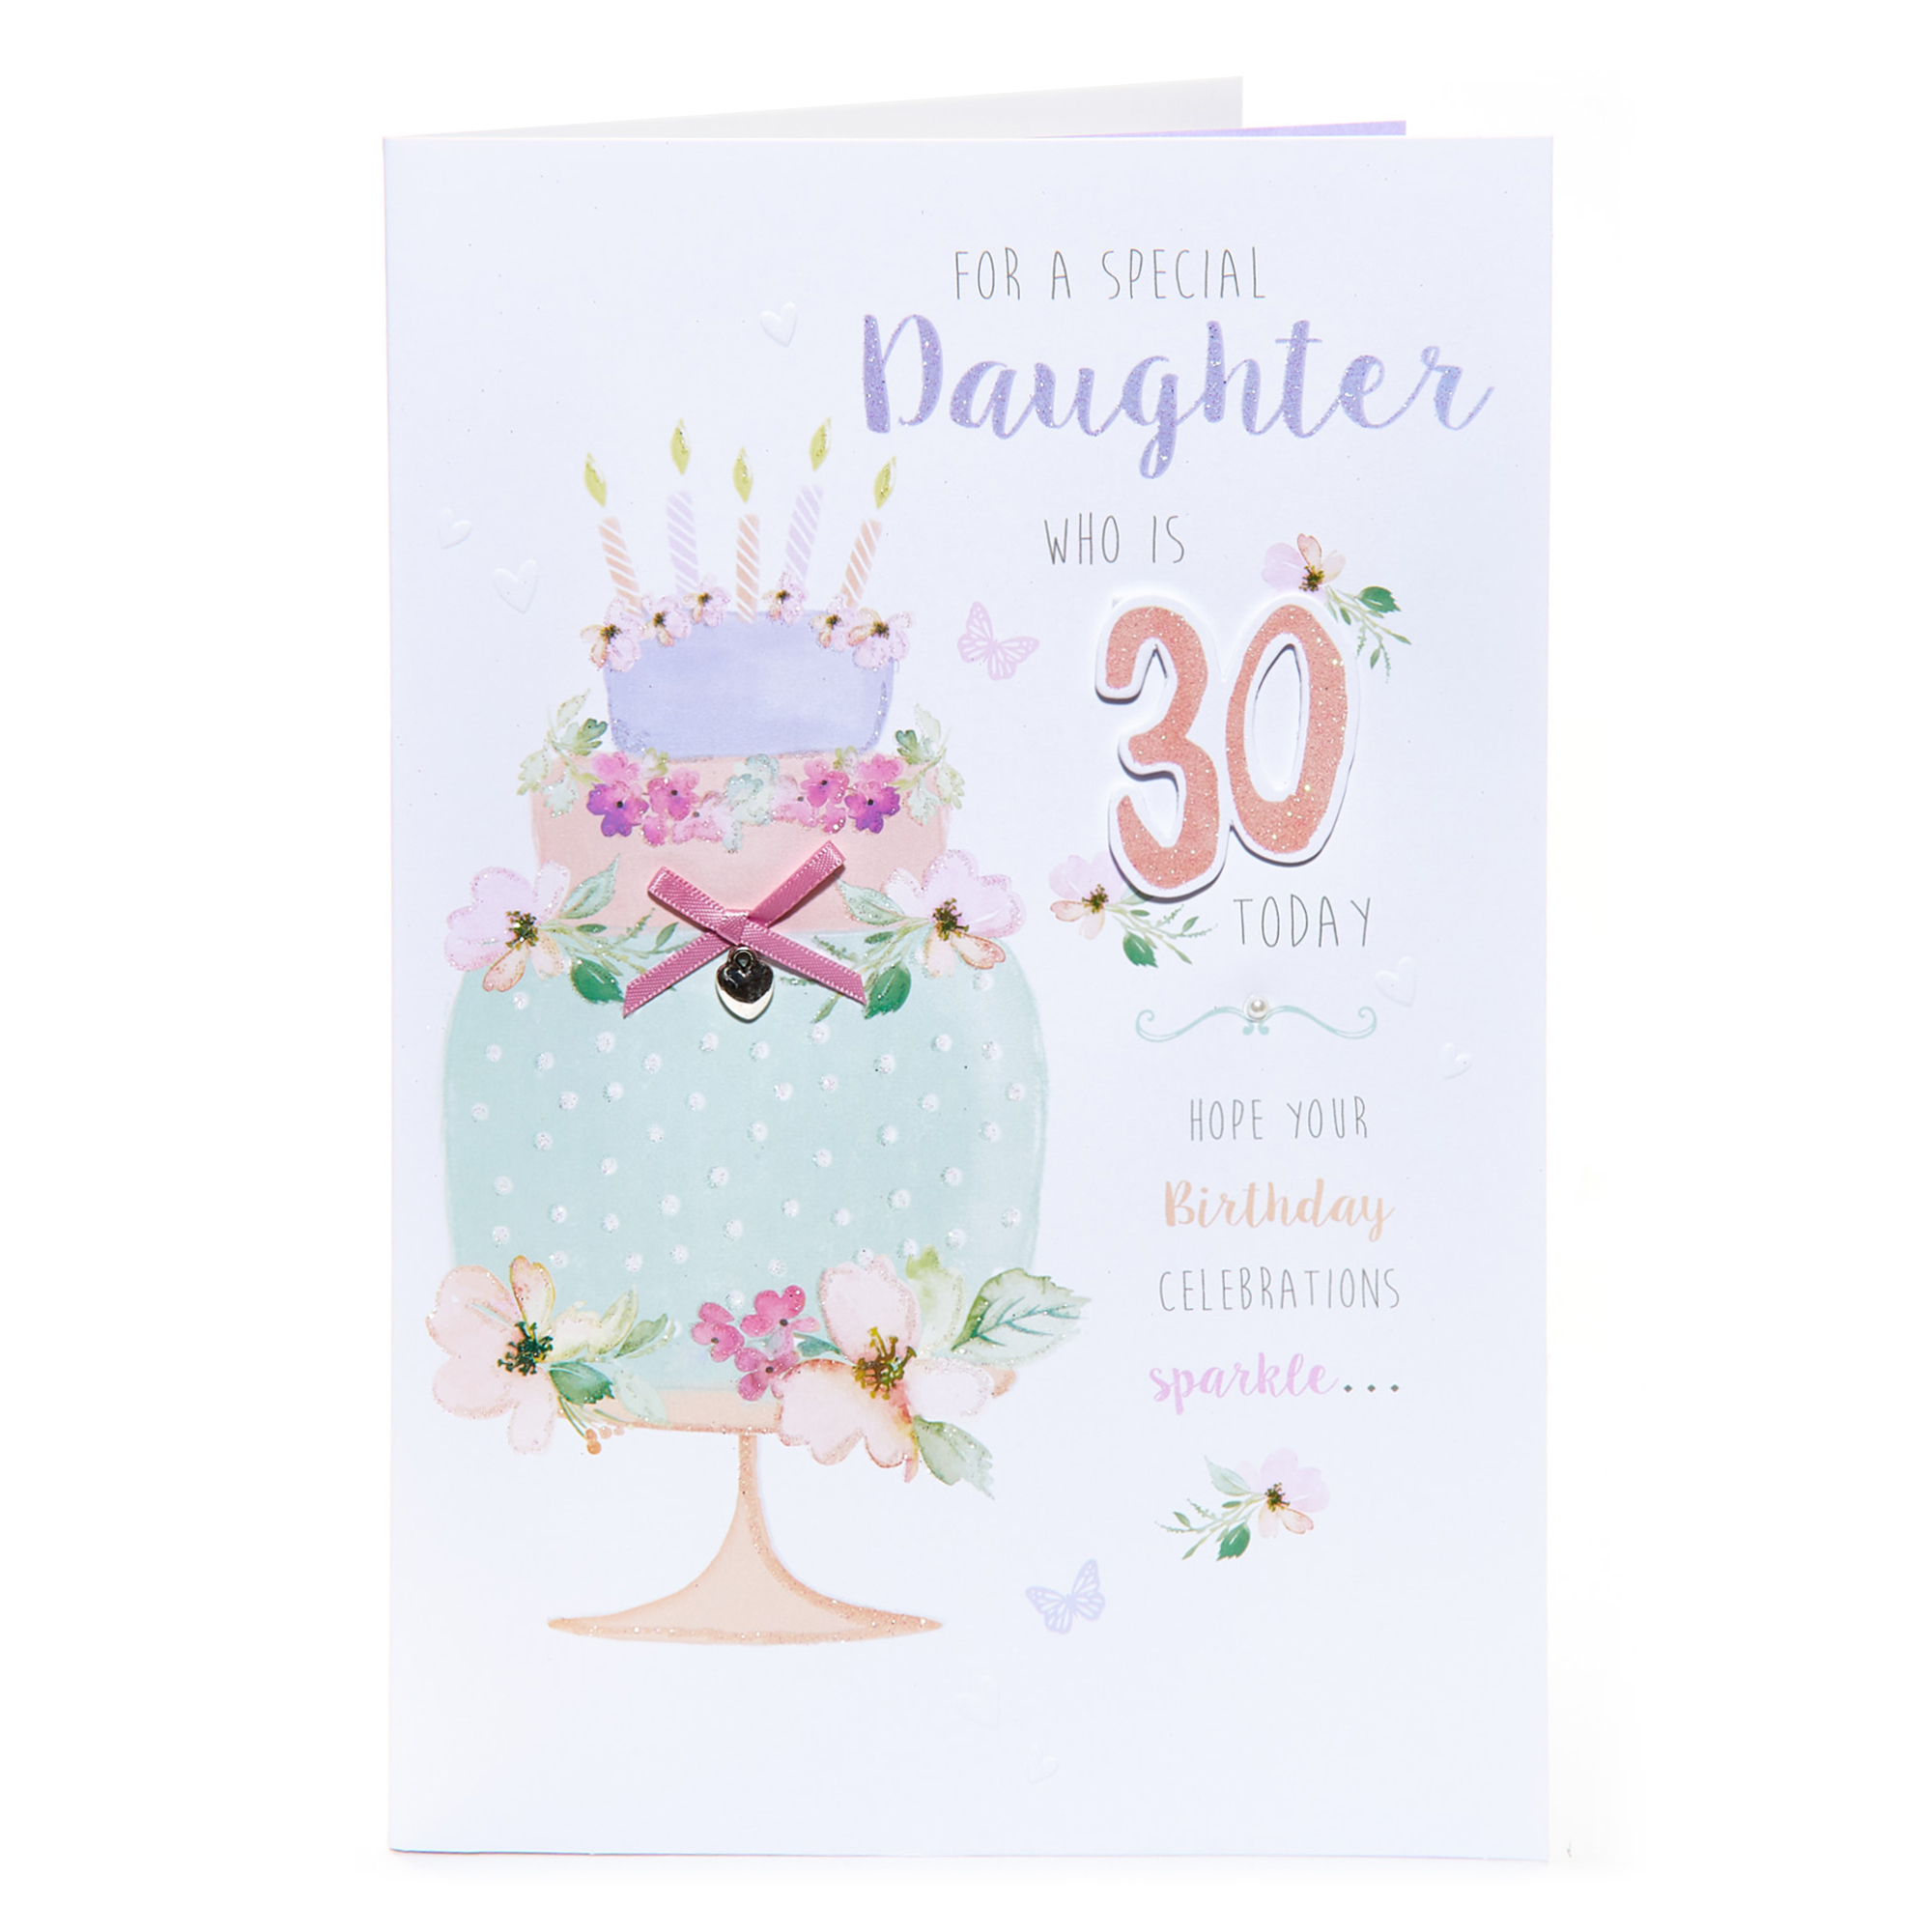 Buy 30th Birthday Card For A Special Daughter for GBP 1